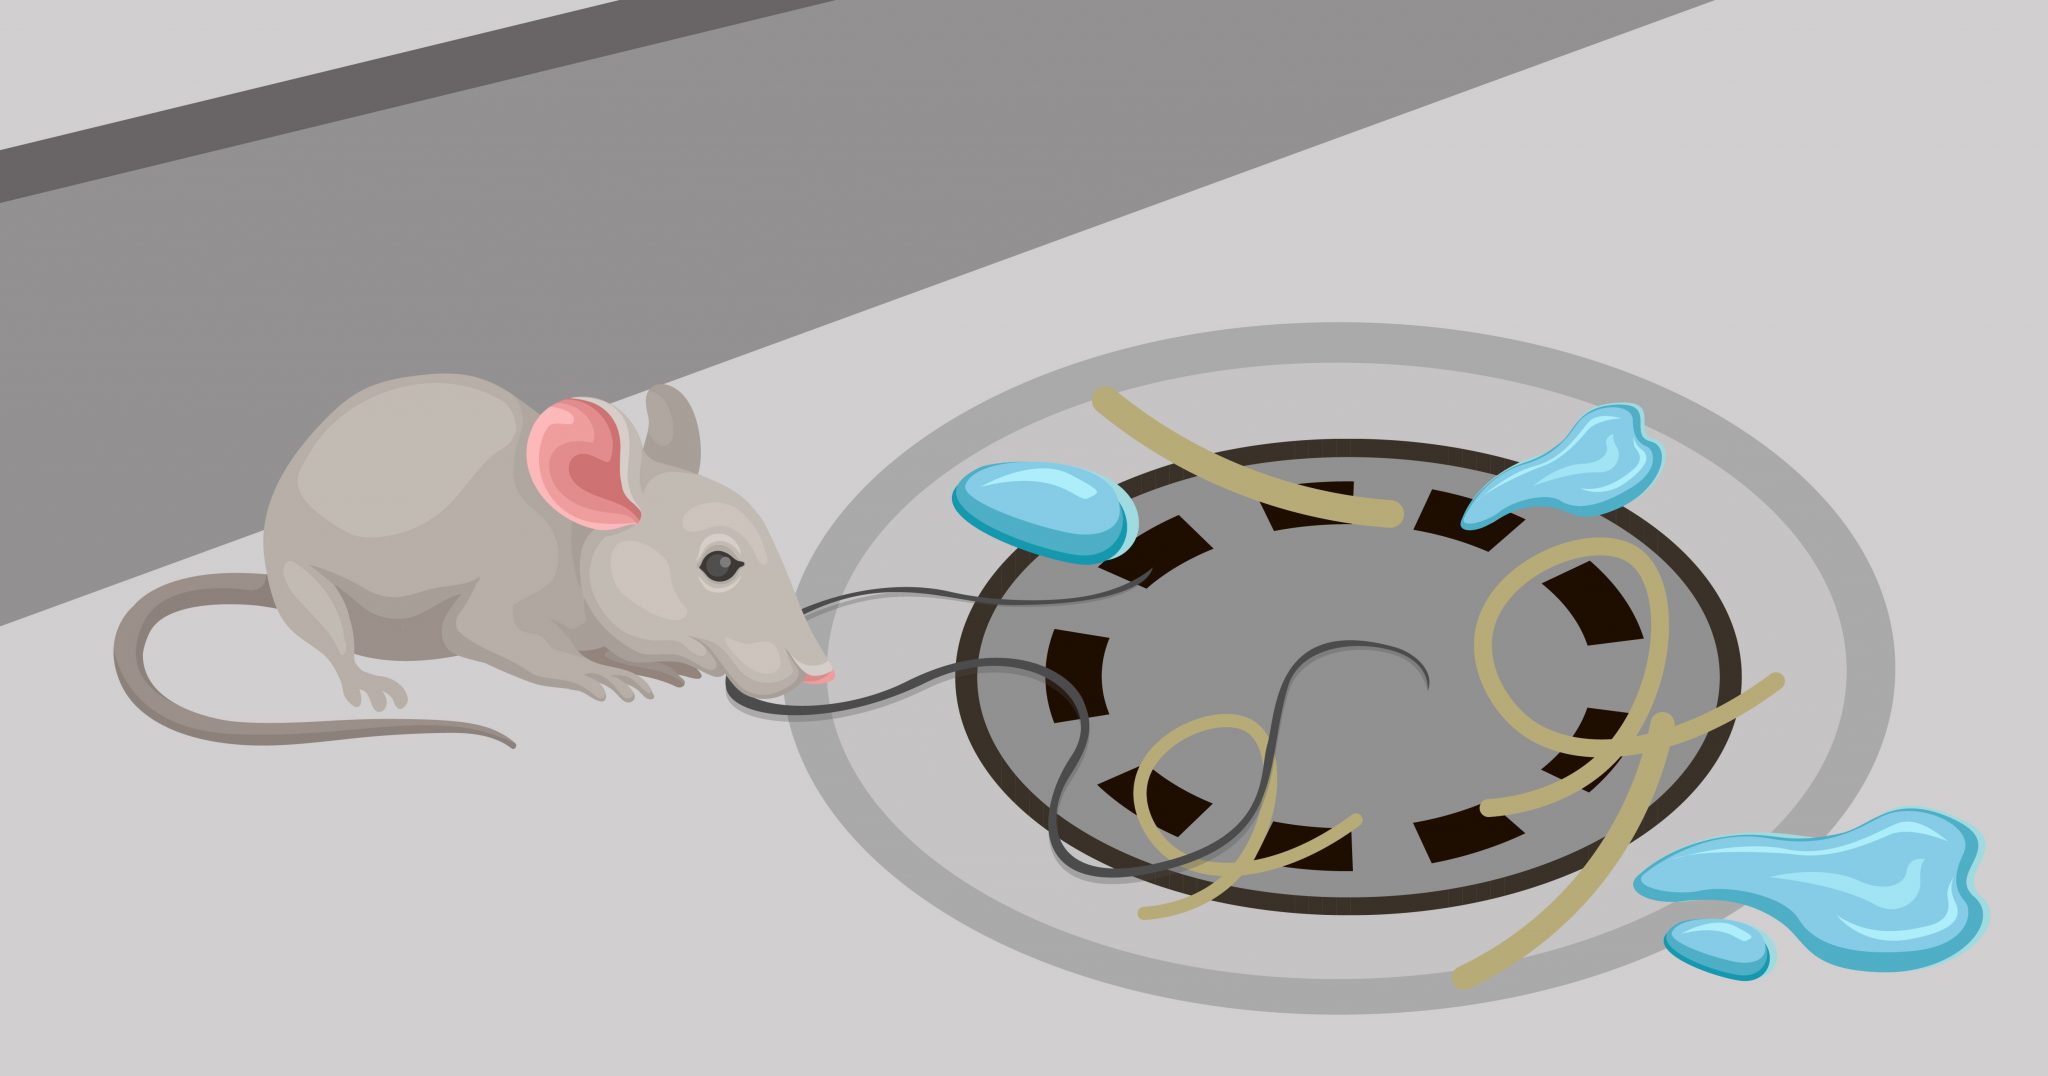 Not having drains professionally cleaned can encourage pests such as rats